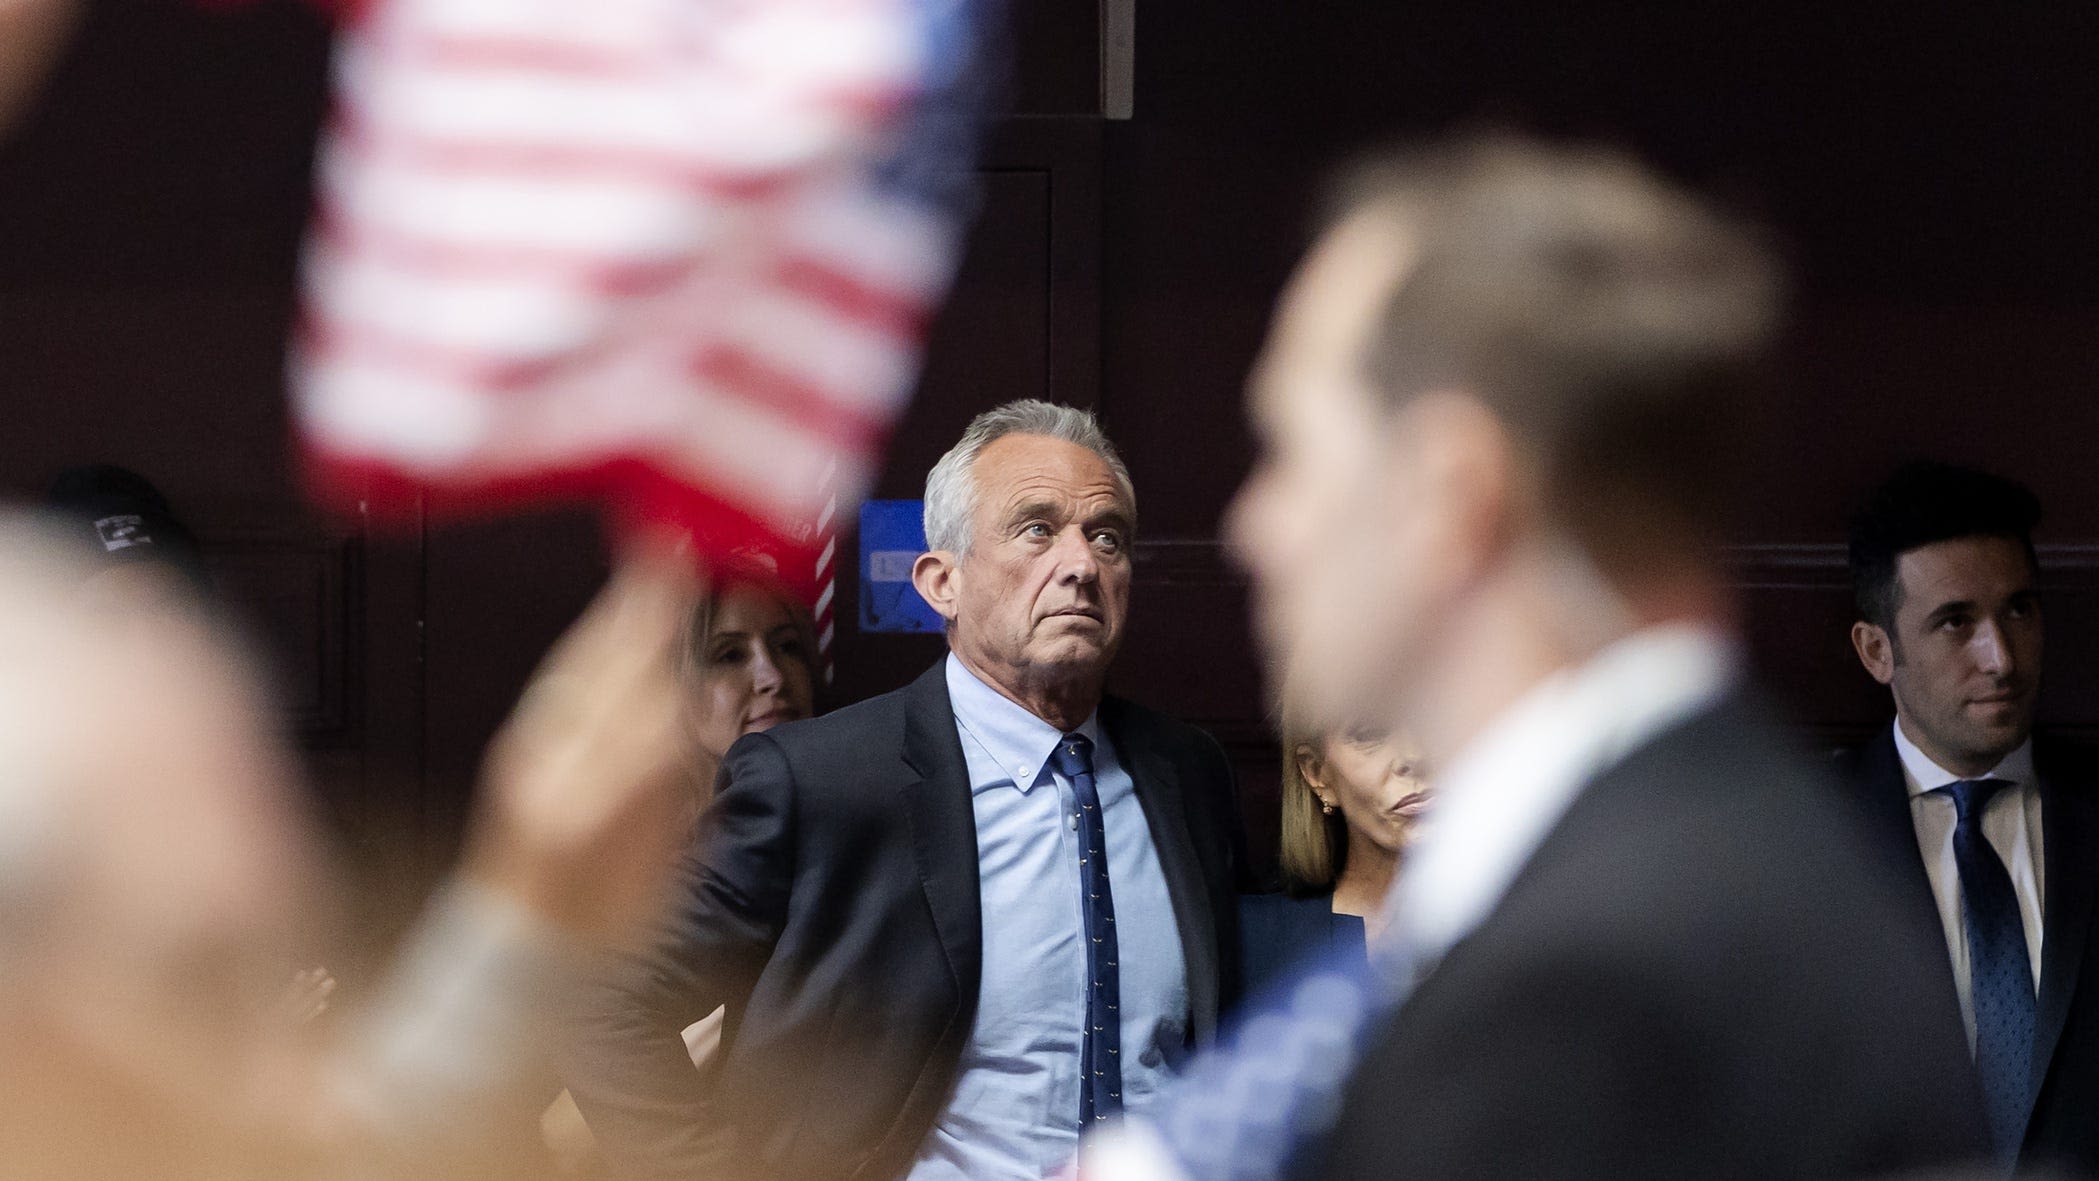 Does RFK Jr. truly live in Westchester? Ruling will decide if he runs for president in NY